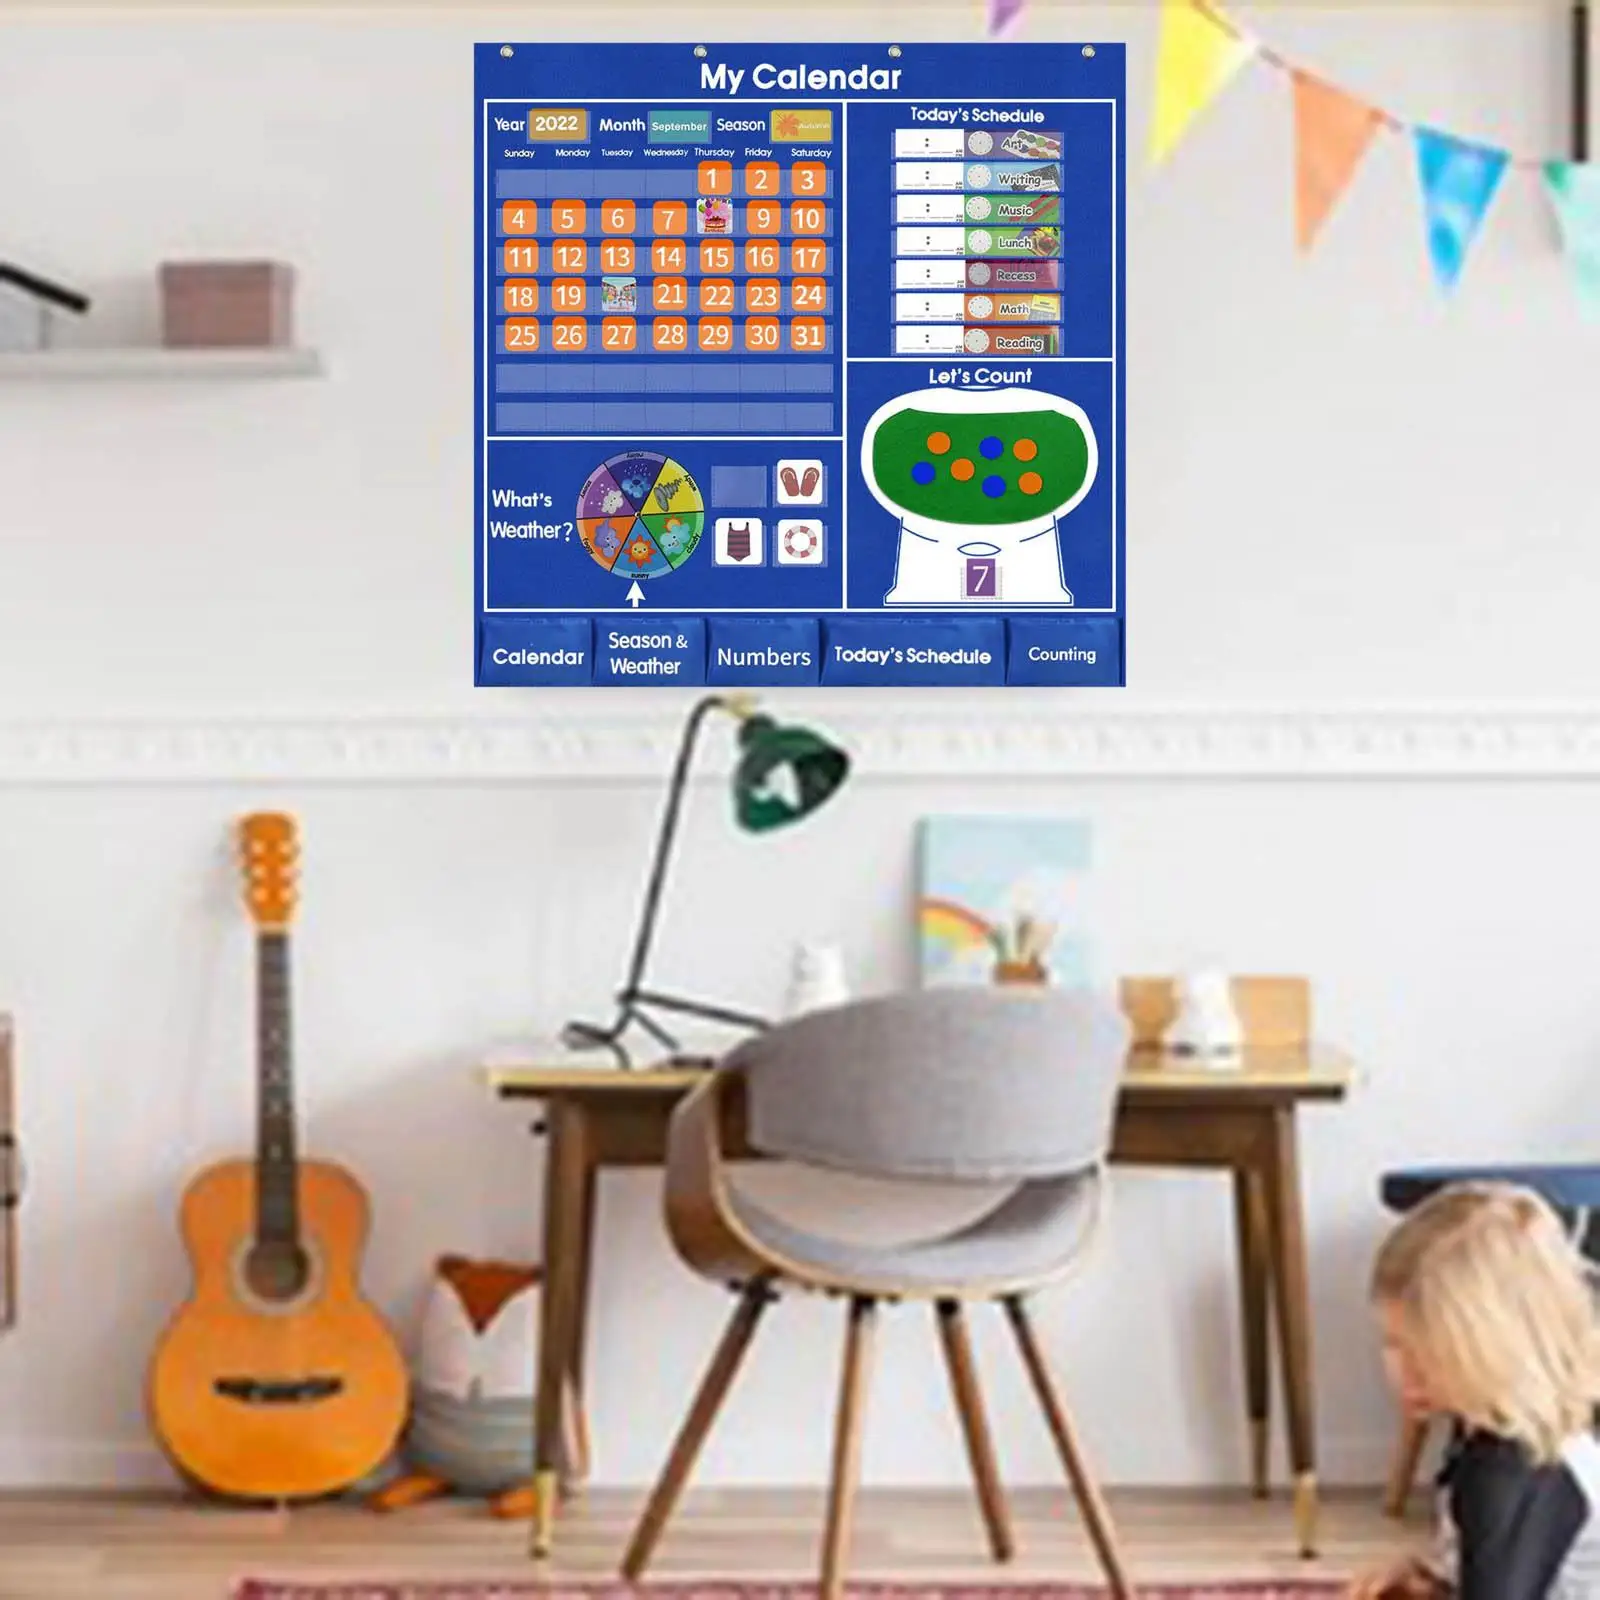 Learning Calendar and Weather  Chart Classroom Calendar Supplies Daily Activities Mathematics for Children  Kids Toddlers